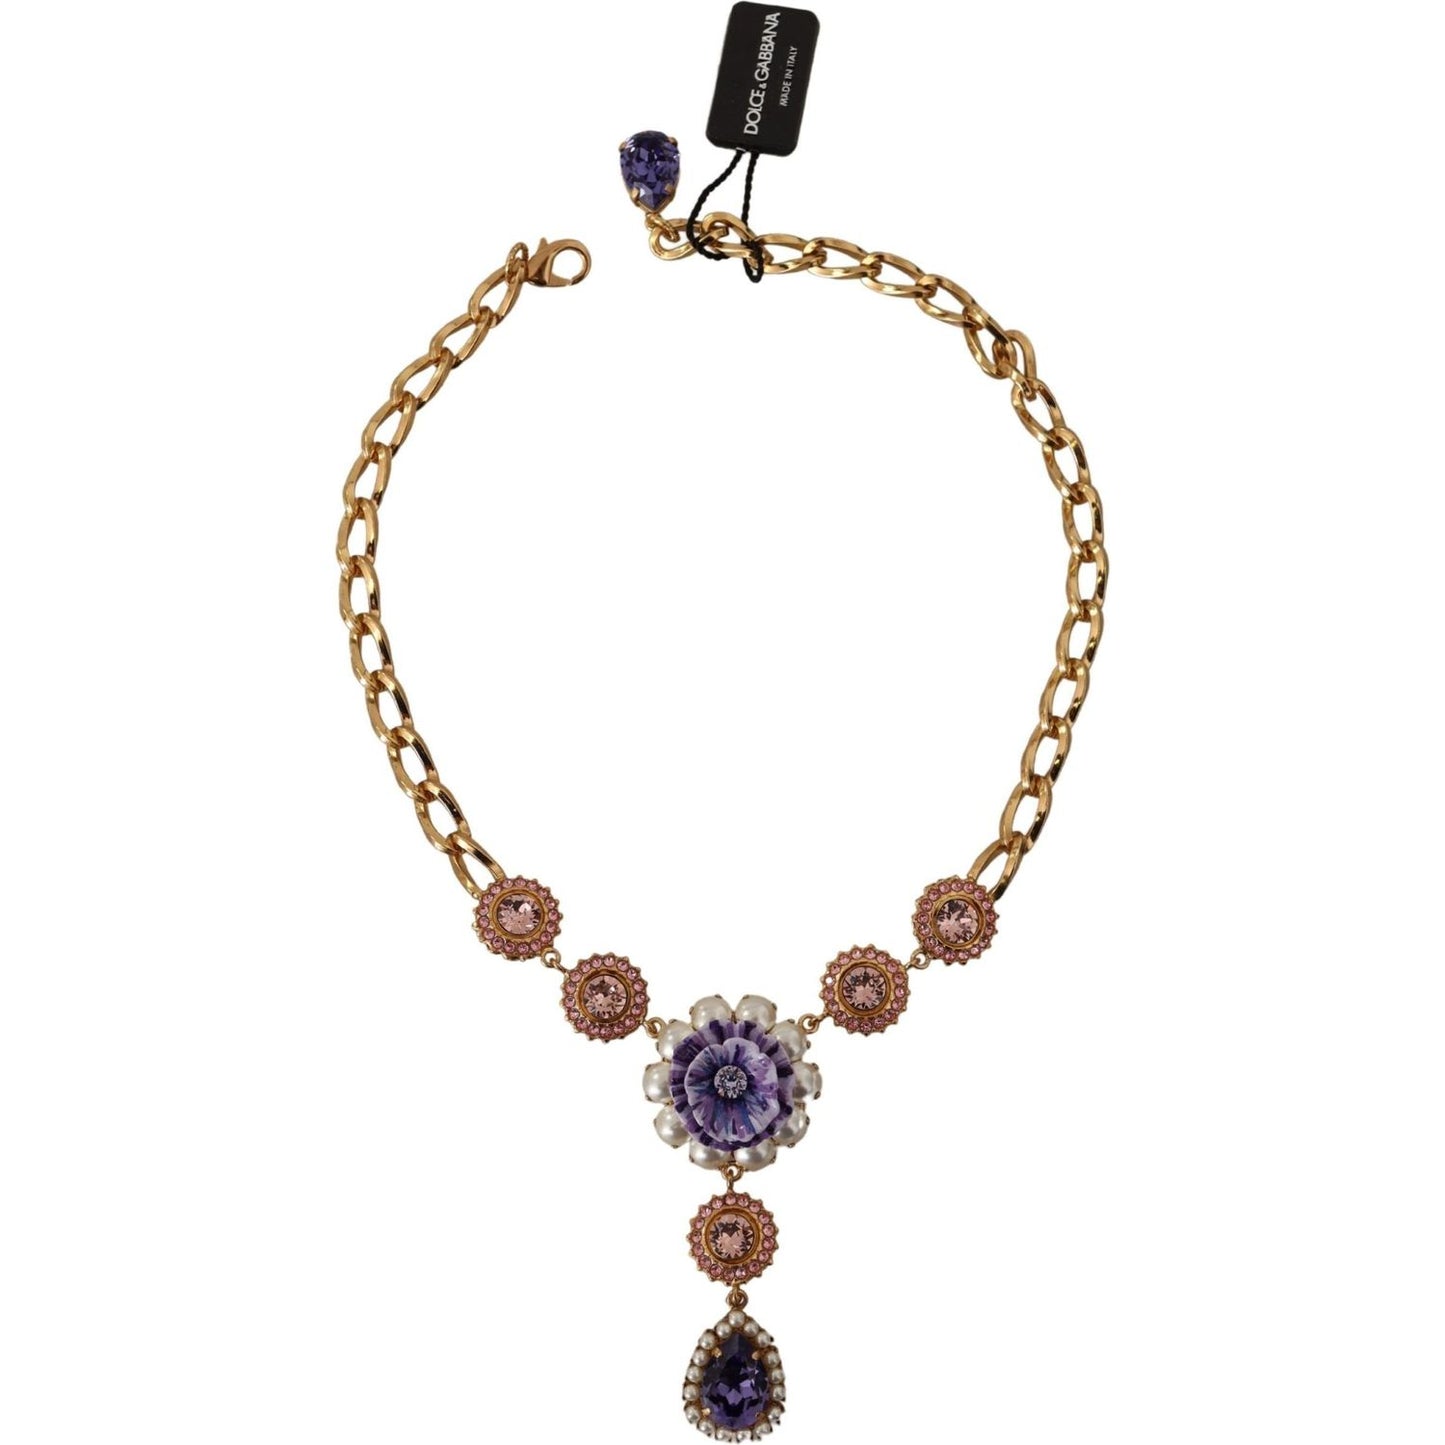 Dolce & Gabbana Elegant Floral Crystal Statement Necklace gold-brass-crystal-purple-pink-pearl-pendants-necklace WOMAN NECKLACE IMG_1963-scaled-3e459dcc-846.jpg